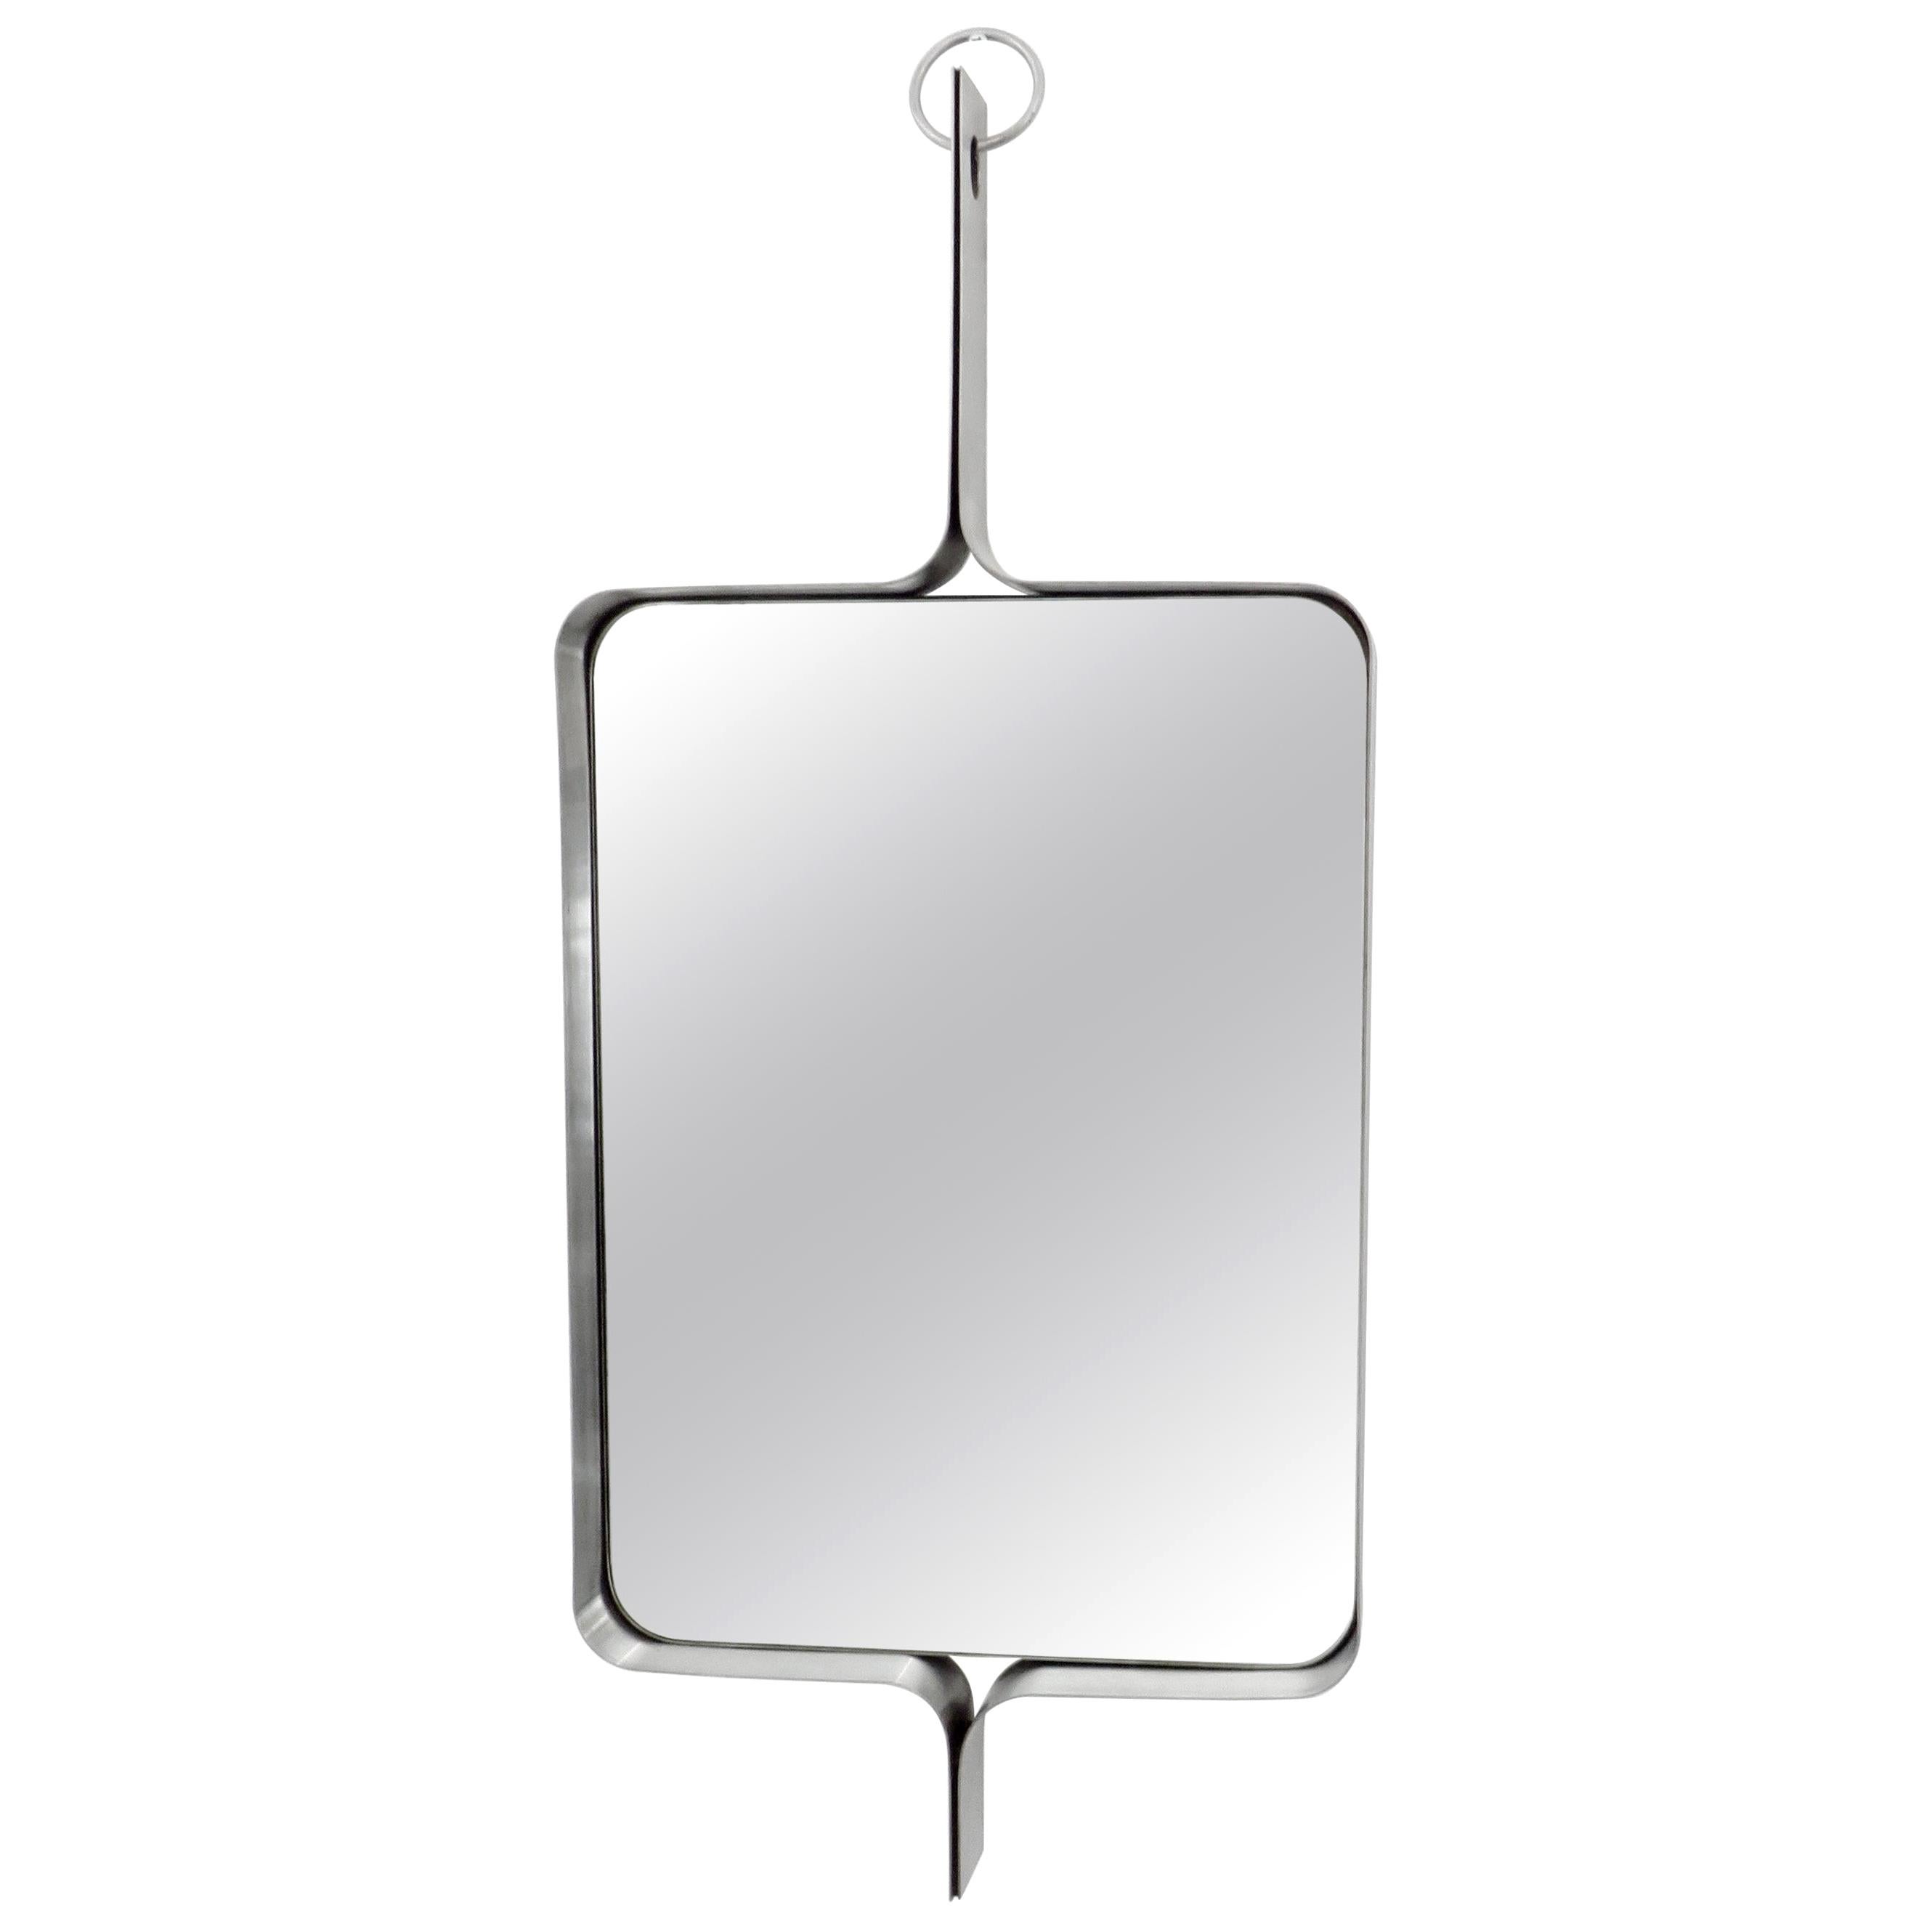 Xavier-Feal French Rectangular Brushed Stainless Steel Wall Mirror, circa 1970